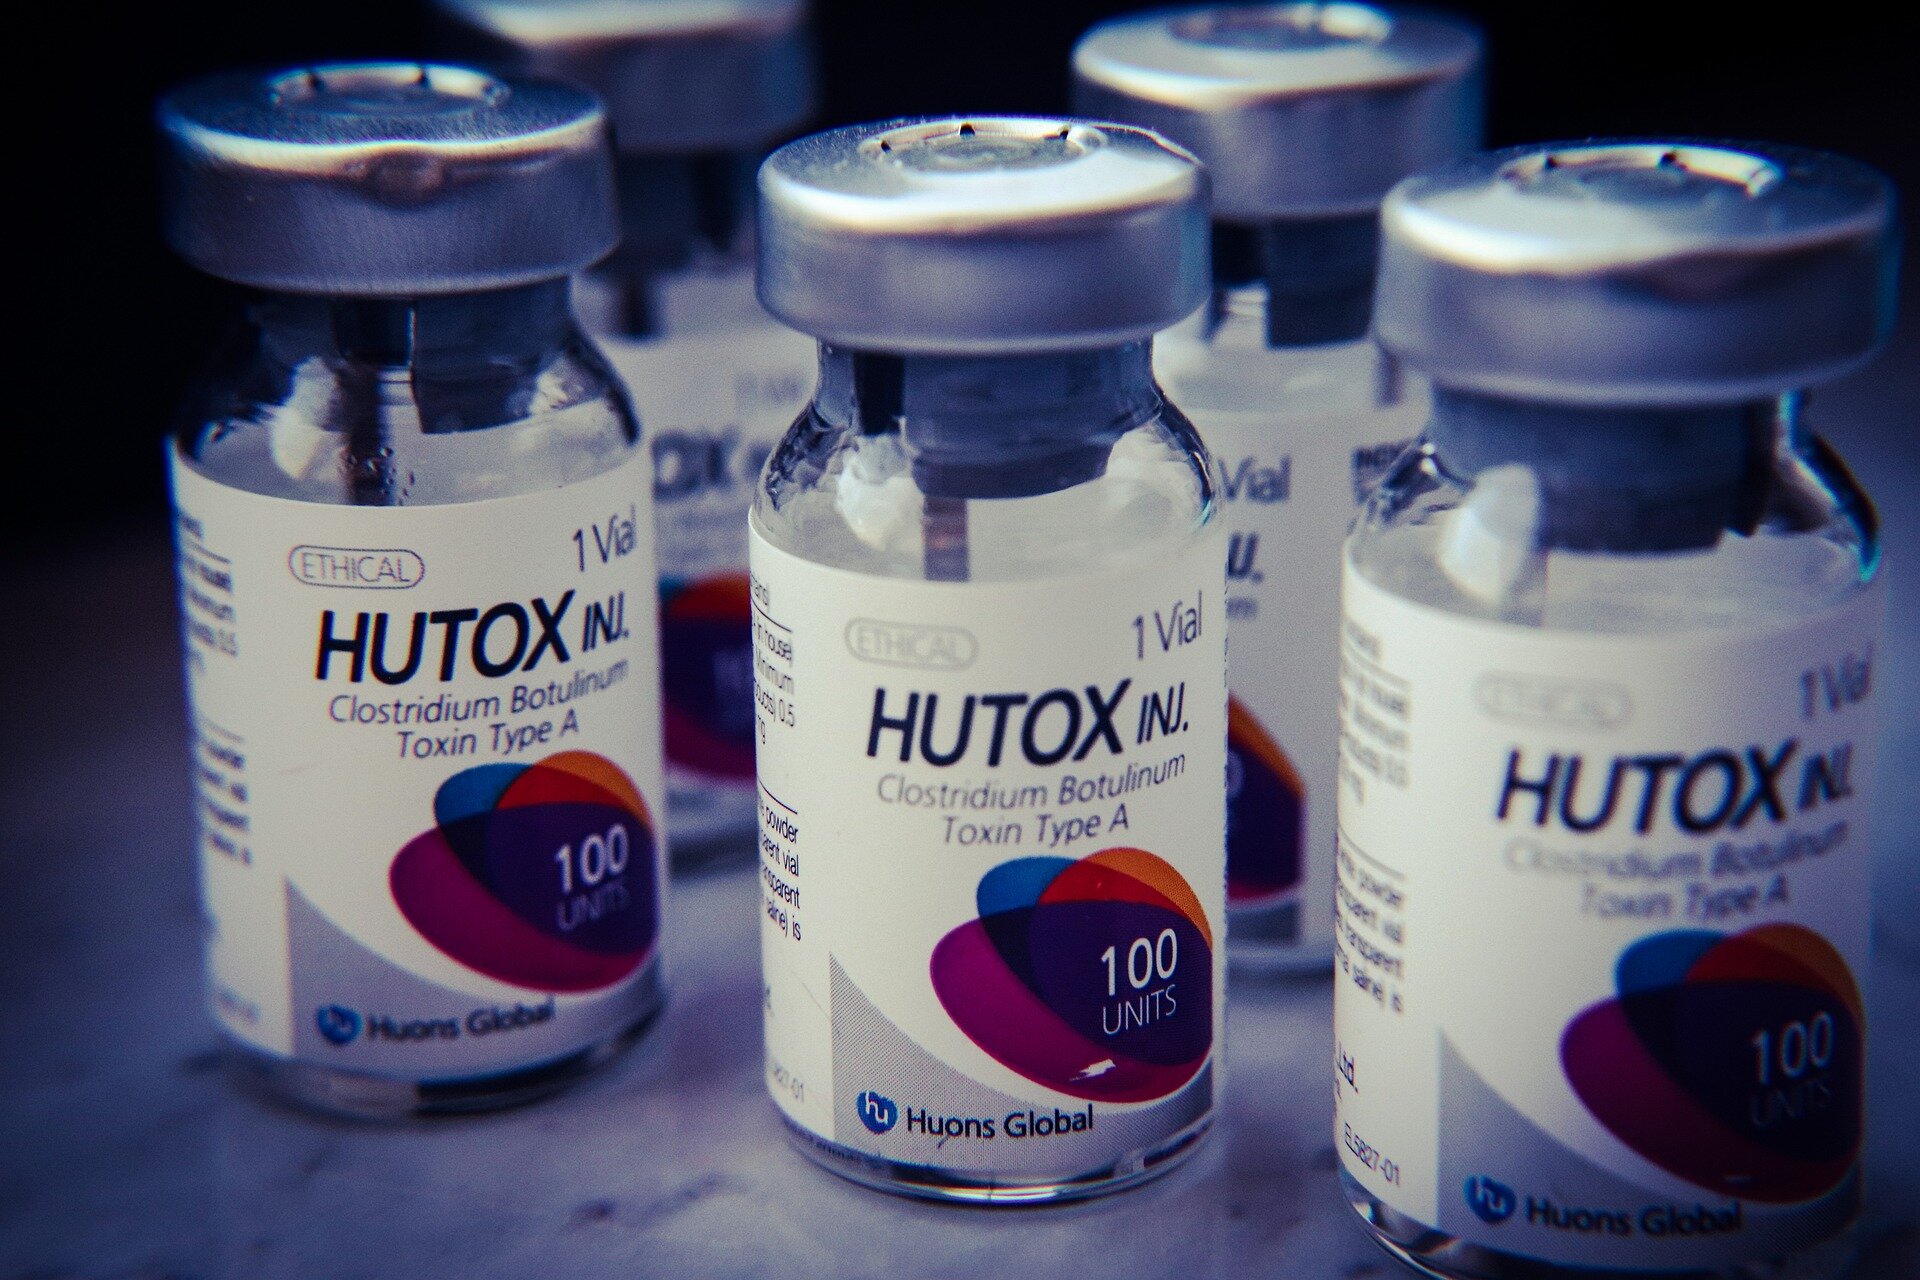 Counterfeit Botox injections pose health risks, warn US officials